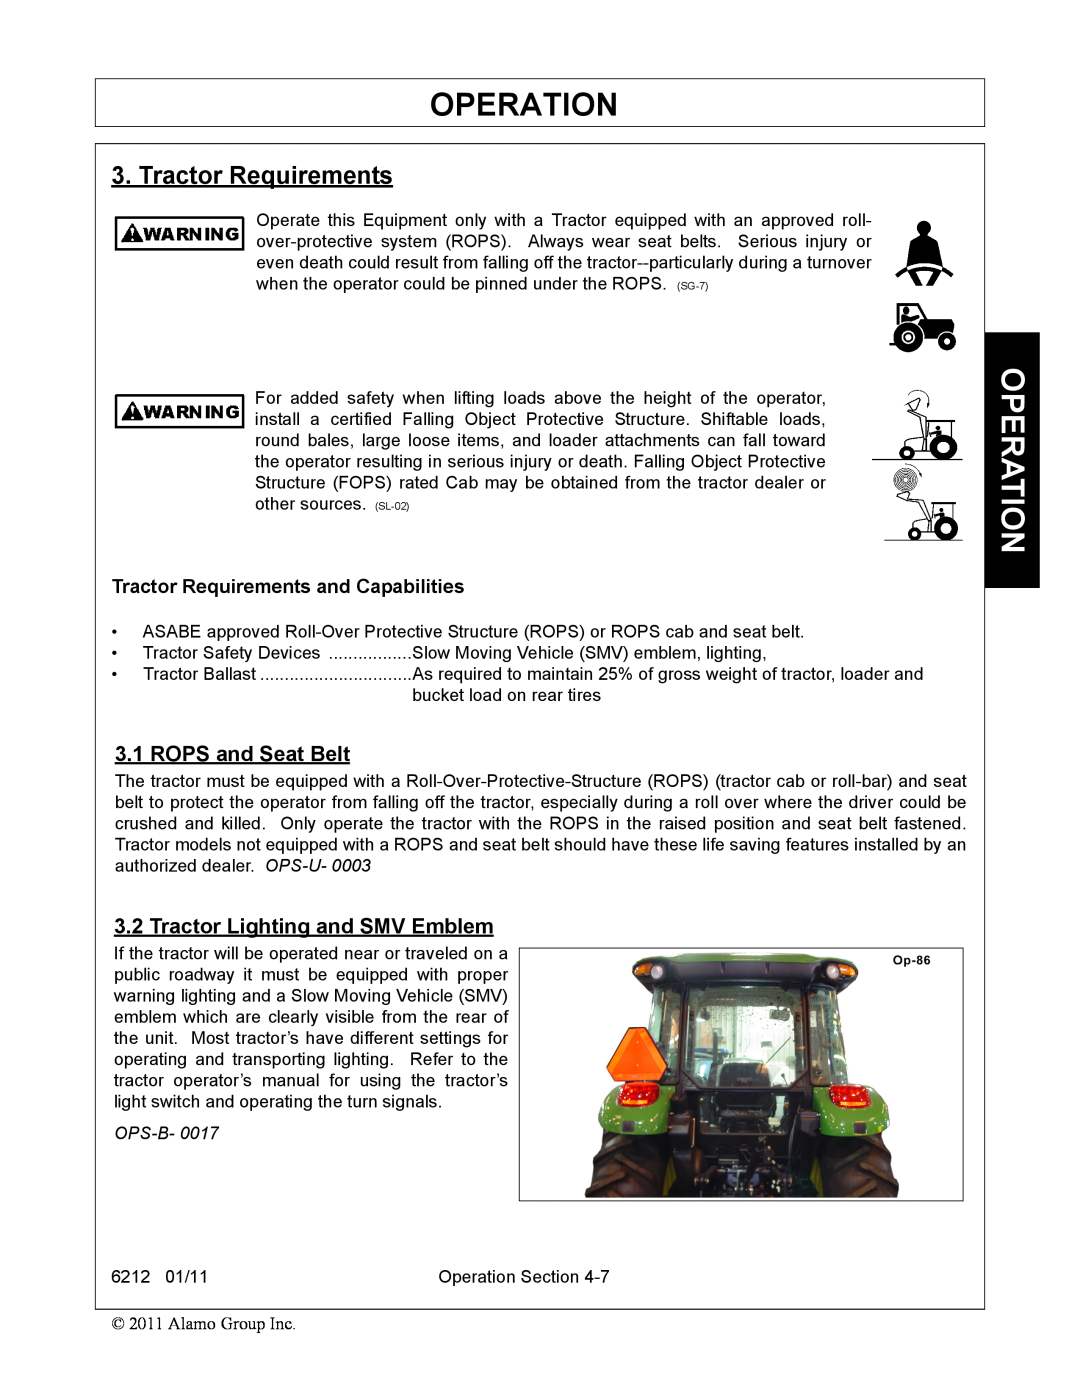 Alamo 6212 manual Operation, Tractor Requirements and Capabilities, Ops-B 